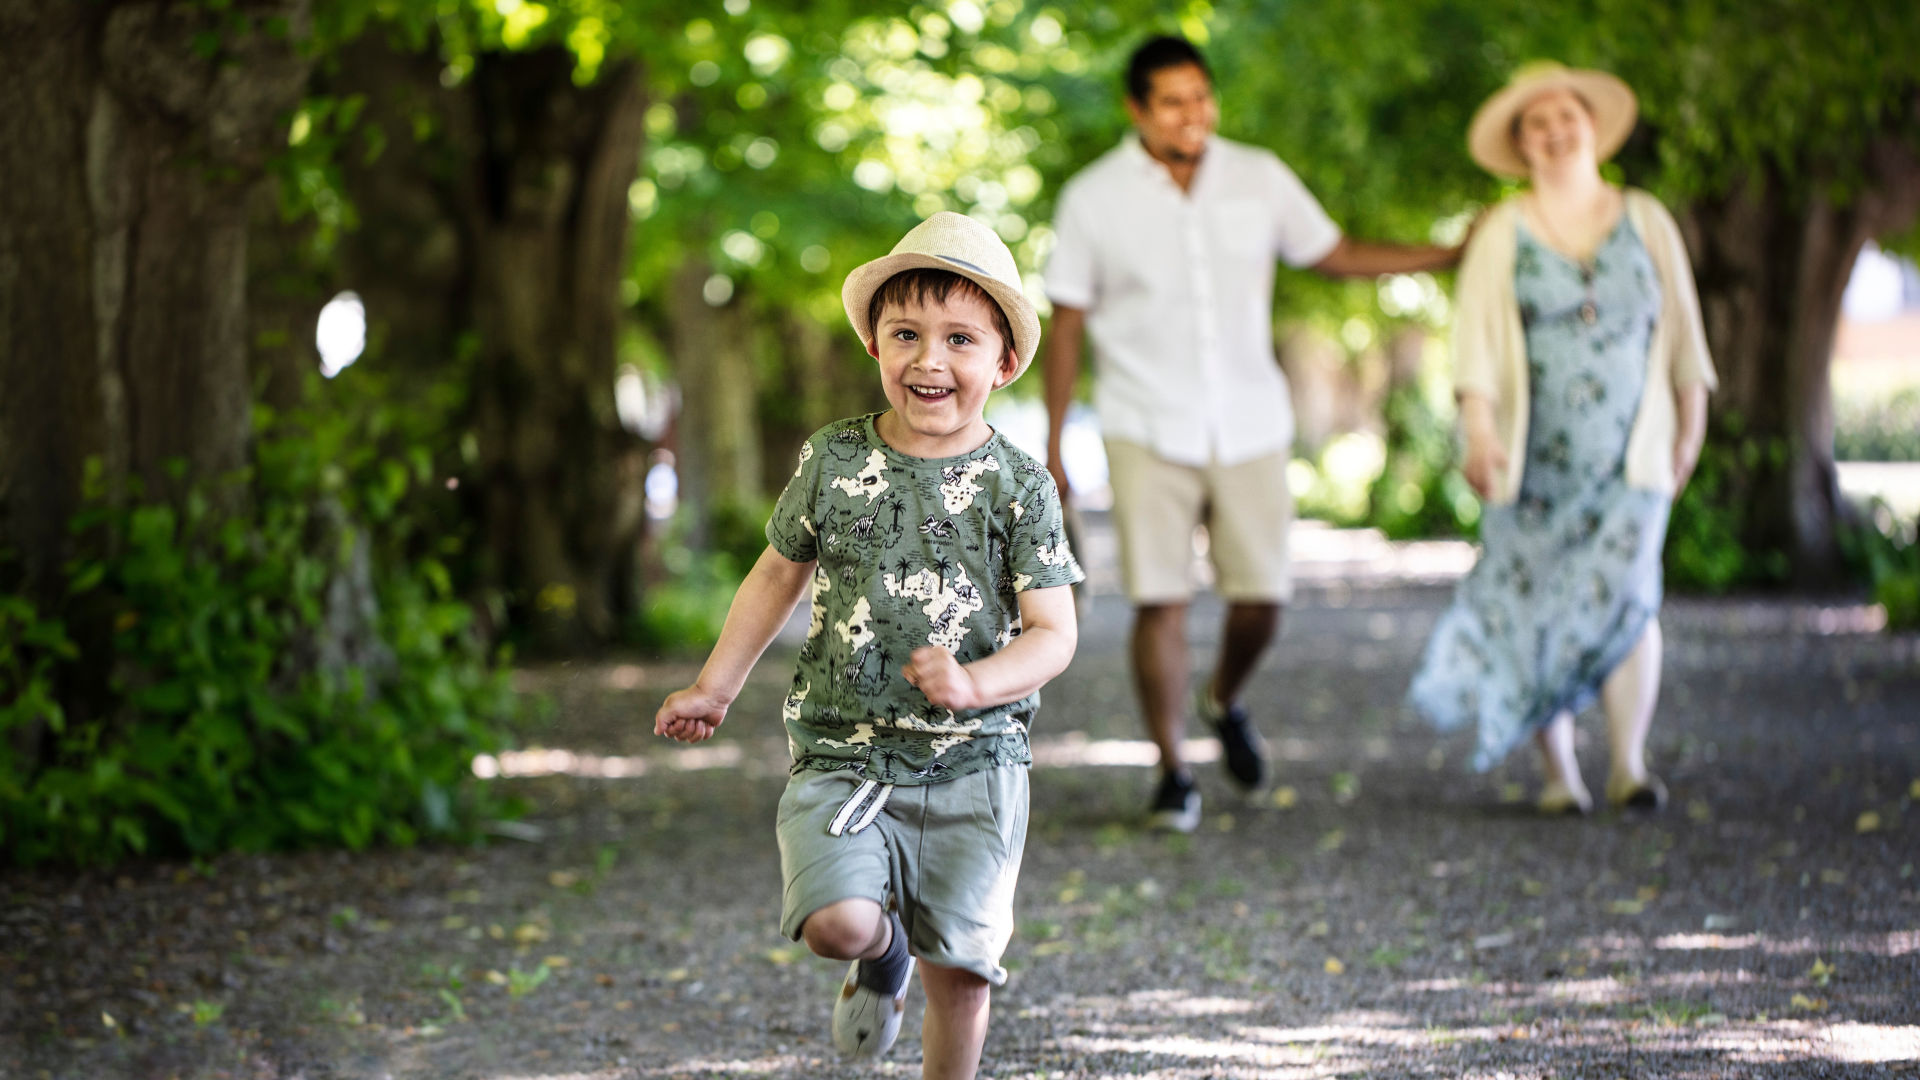 A child who is happy and running in the castle park. The child's parents can be seen in the background.